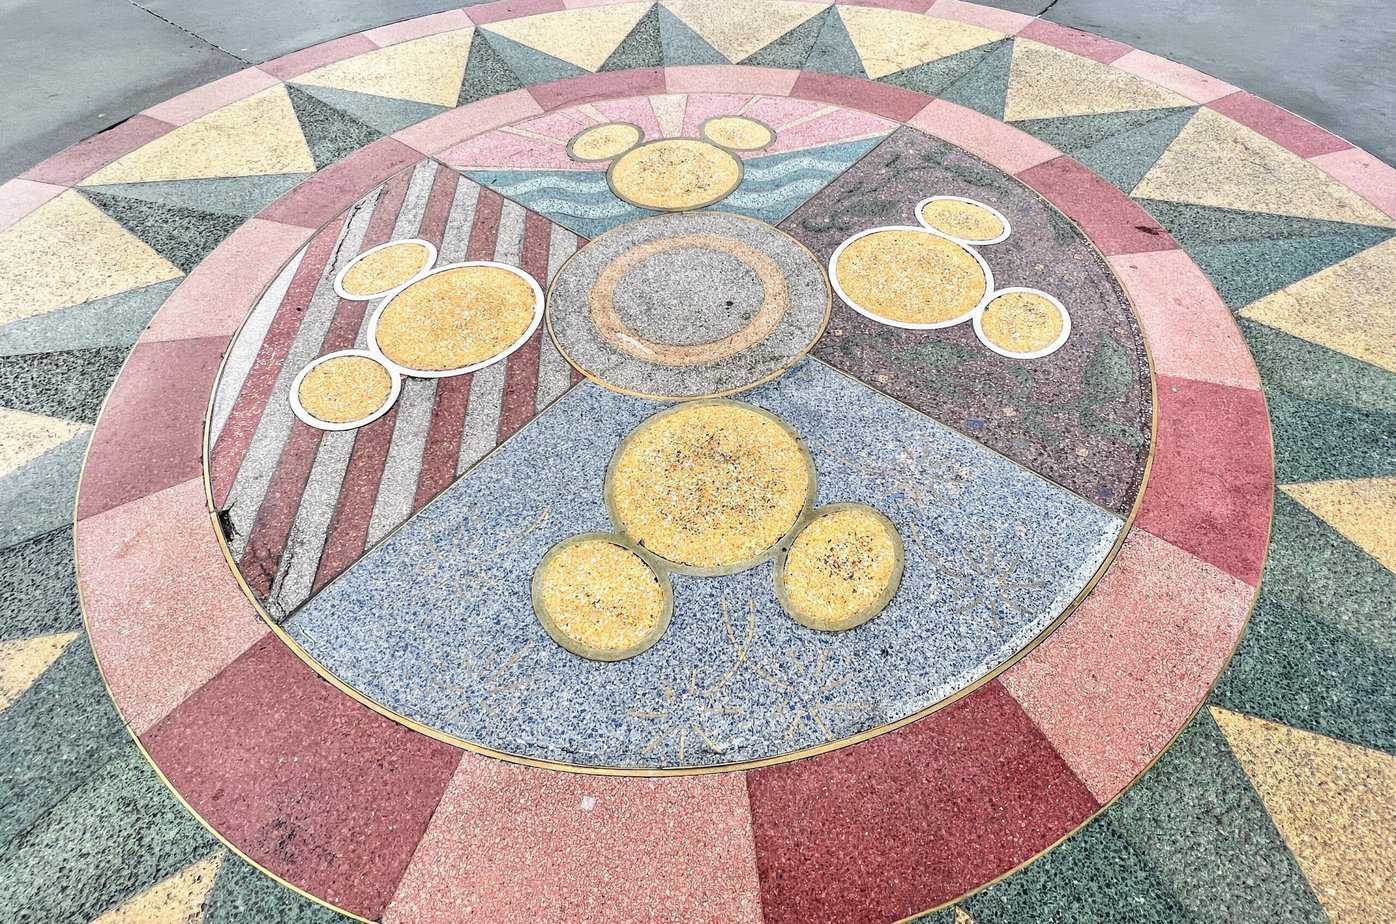 best days to visit Disneyland in March: Is Disneyland busy in March? Compass mosaic in esplanade with 4 mickey heads. 